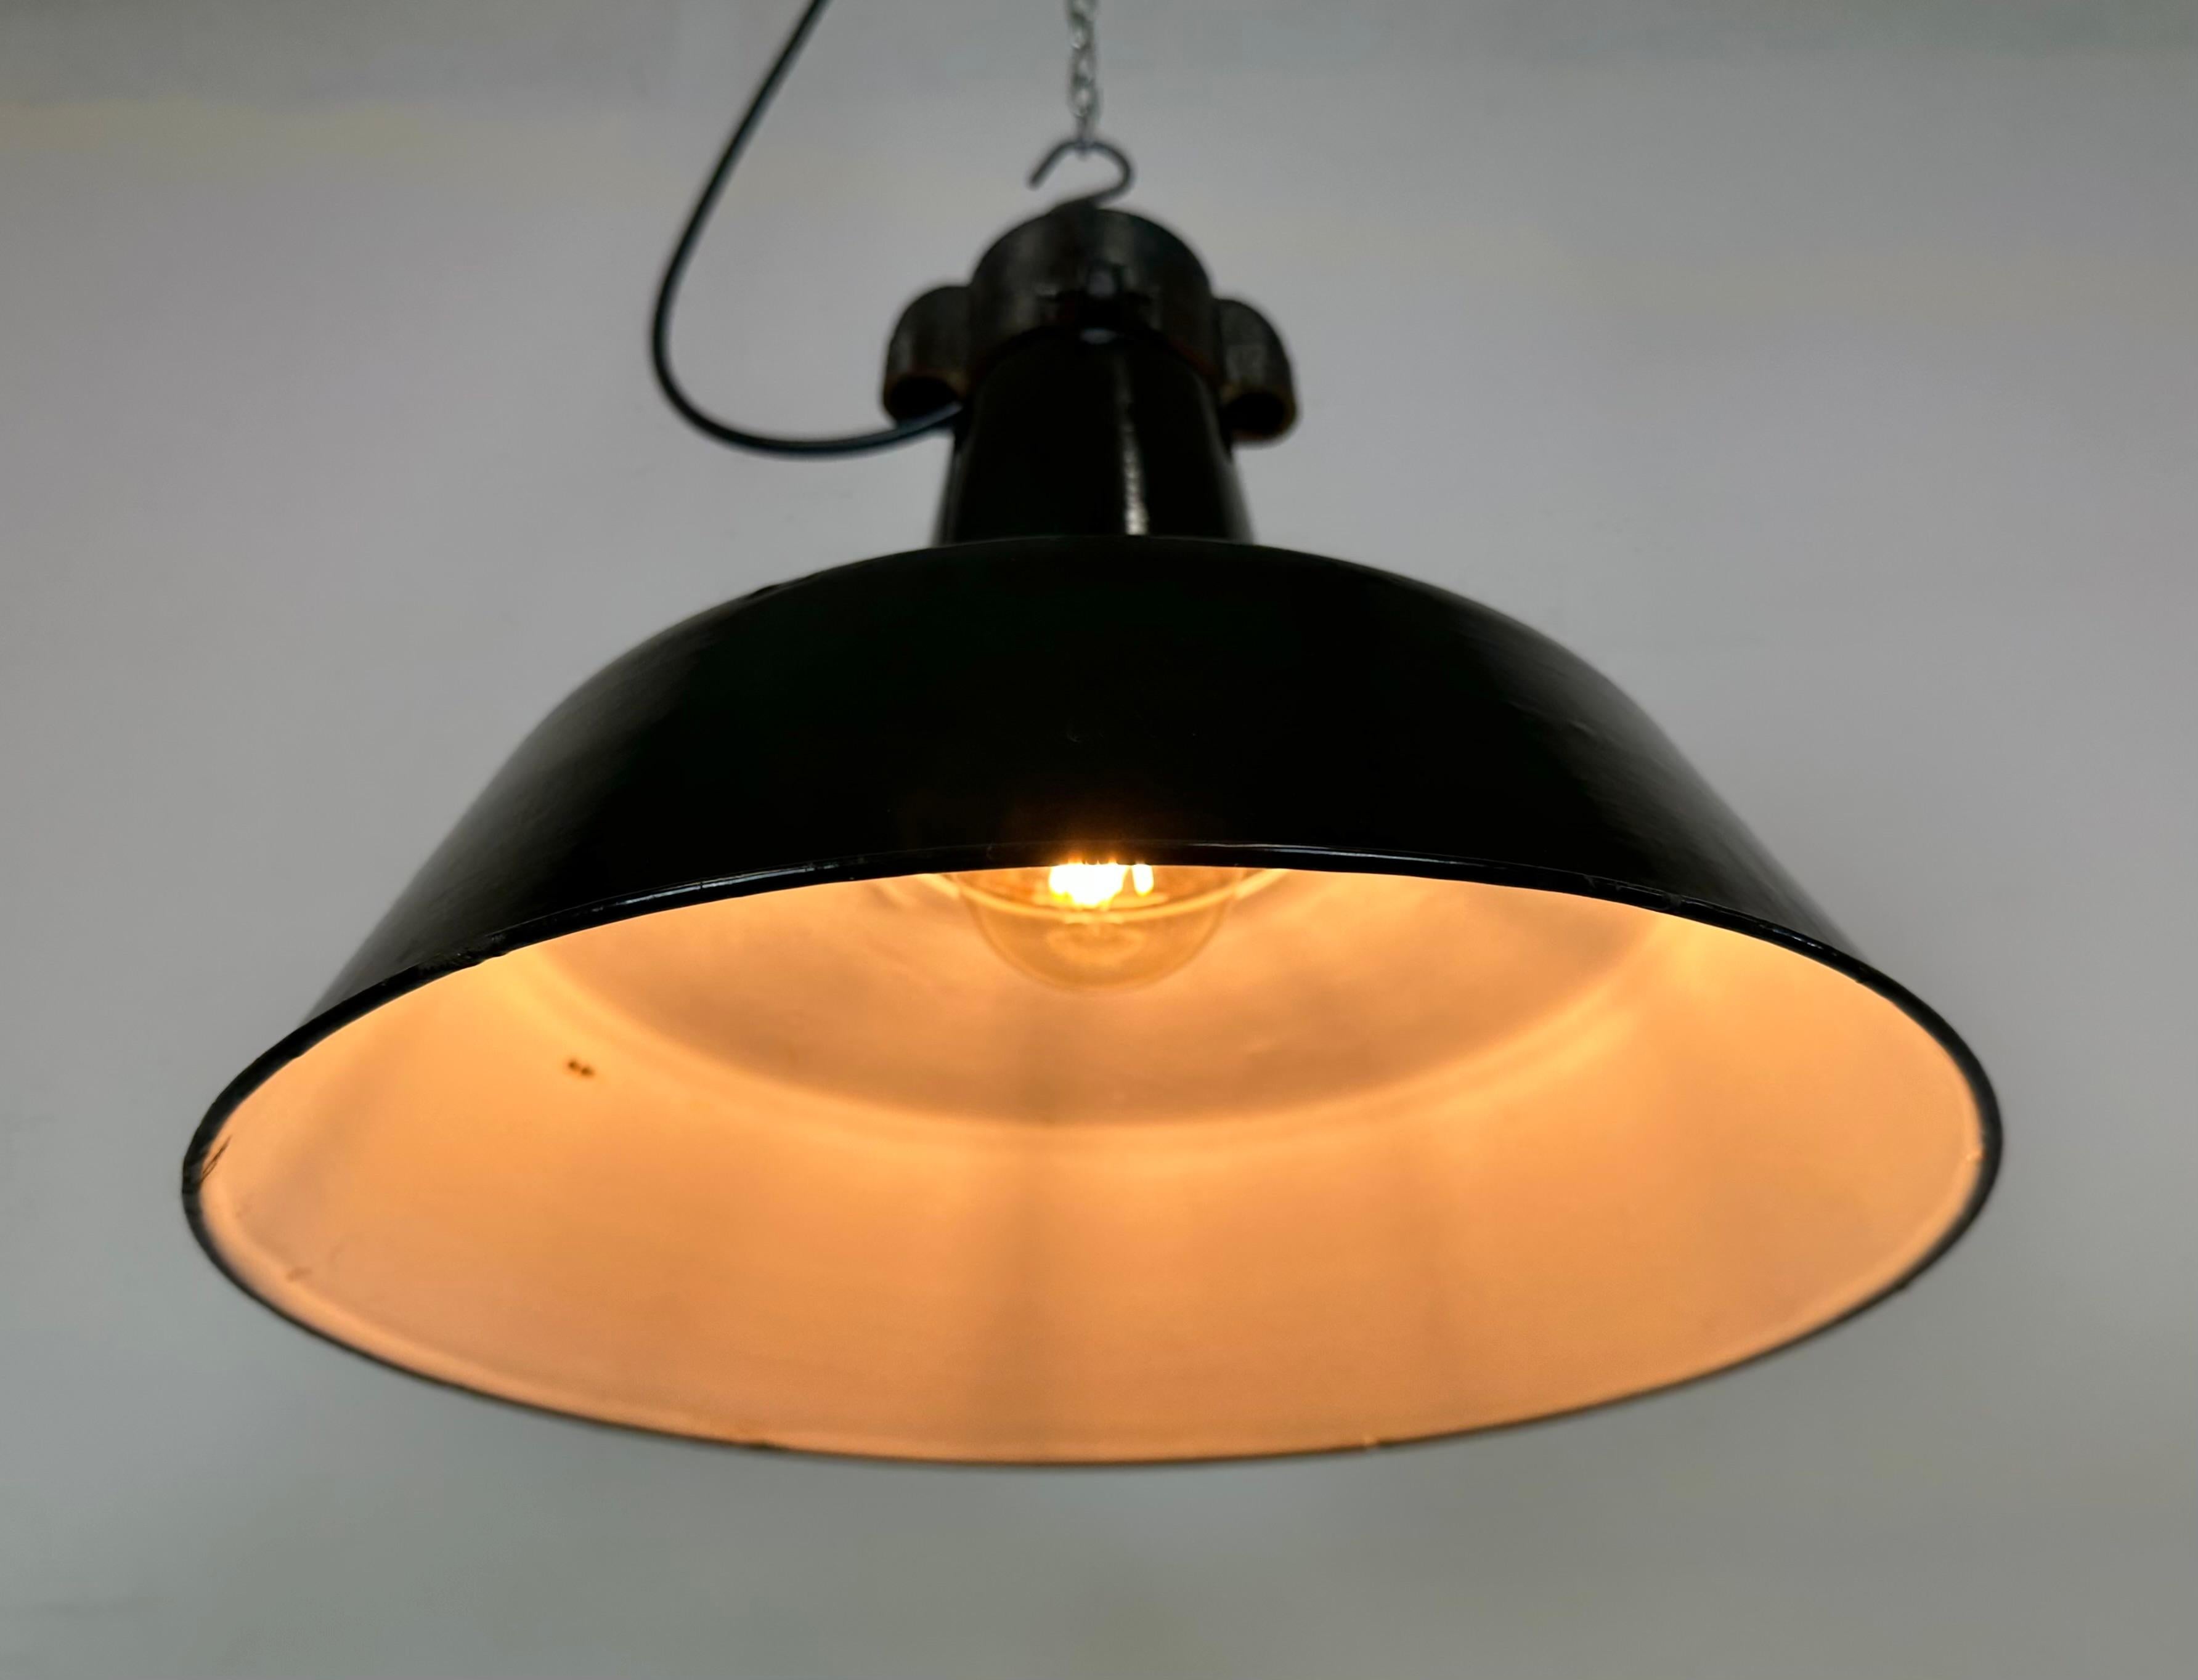 Industrial Black Enamel Factory Lamp with Cast Iron Top, 1950s For Sale 6